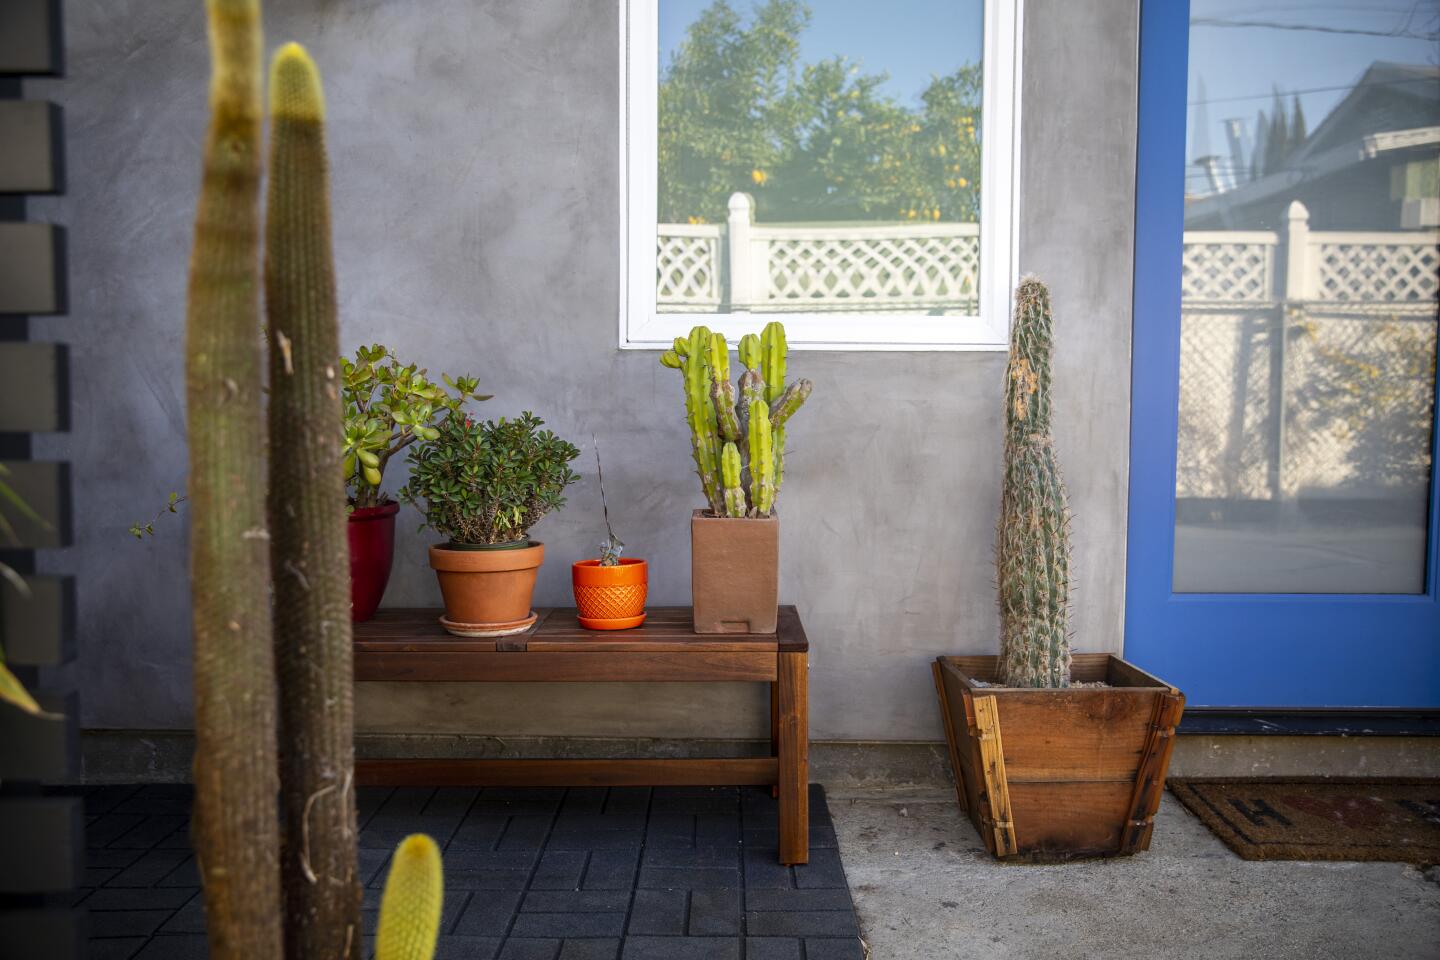 Potted succulents are arranged in front of the home.